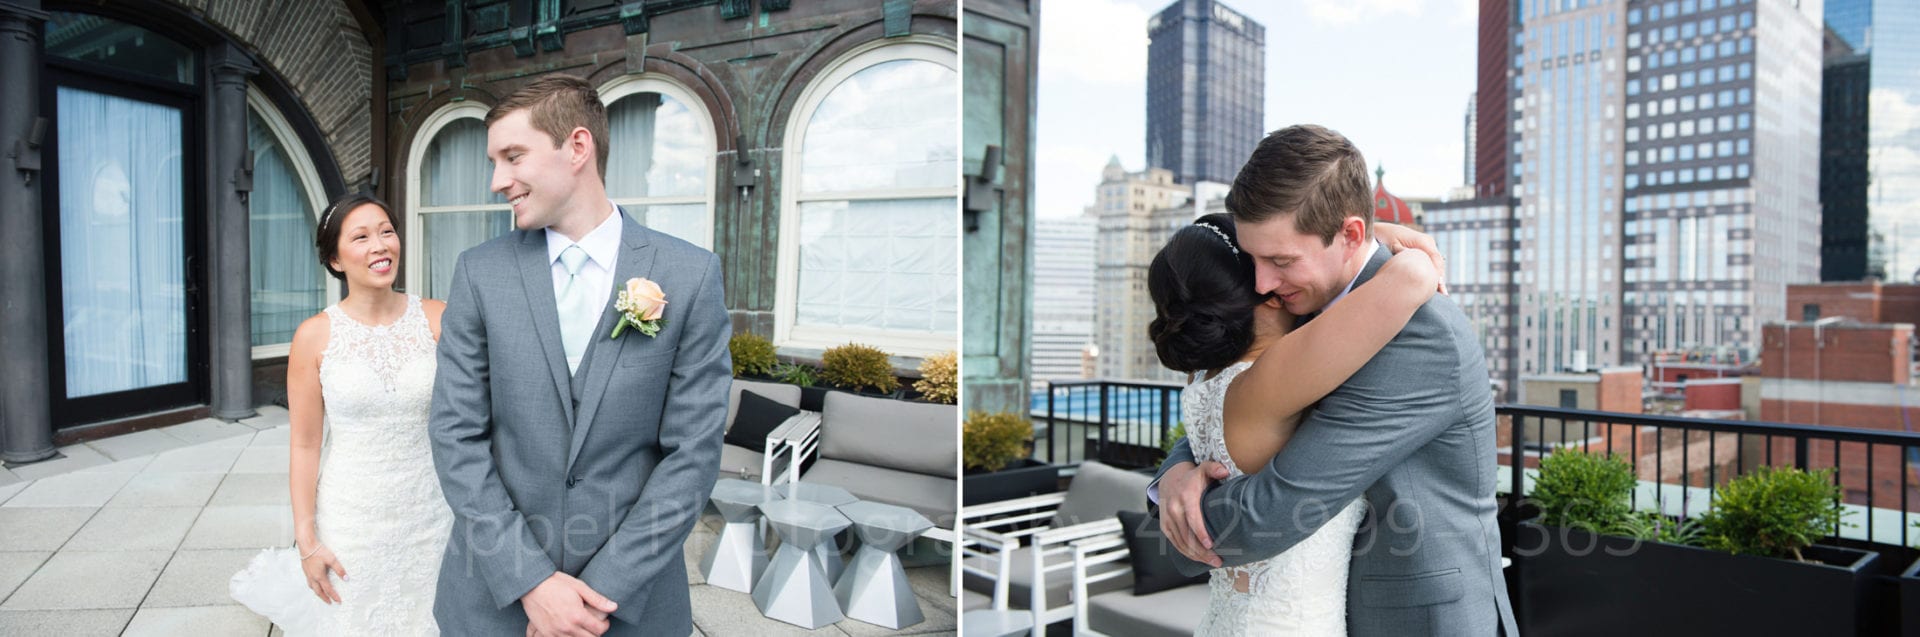 the bride and groom embrace on a balcony with a view of downtown pittsburgh